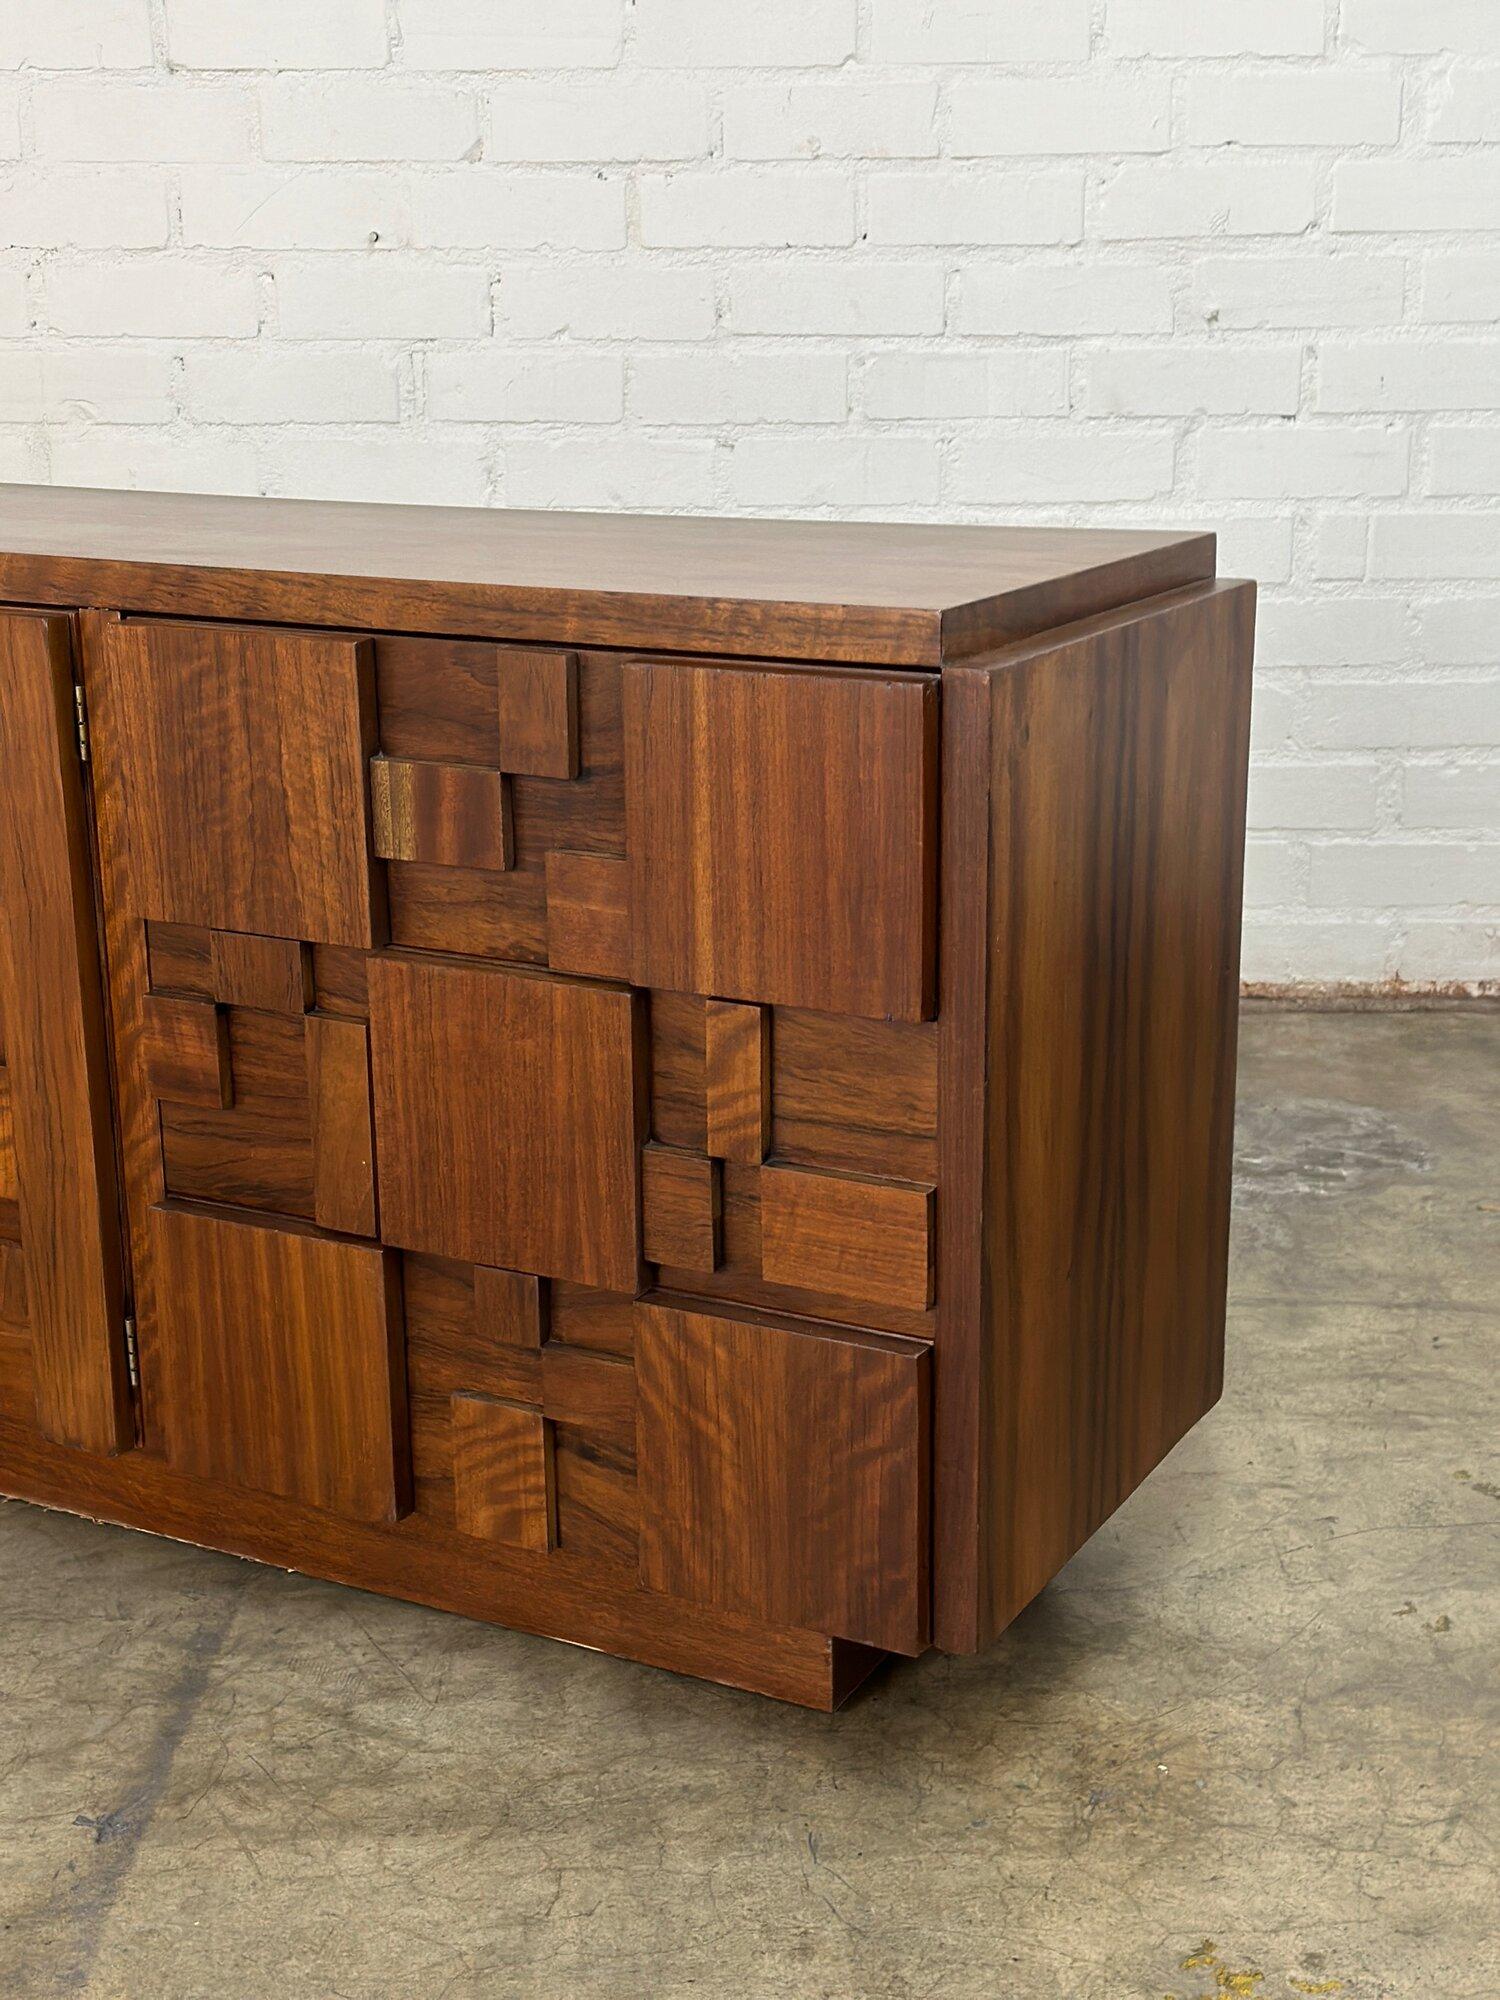 W78 D18 H30

Fully refinished 1970’s Brutalist dresser by Lane. Finished in a medium walnut,  Item is fully functional and sturdy. 